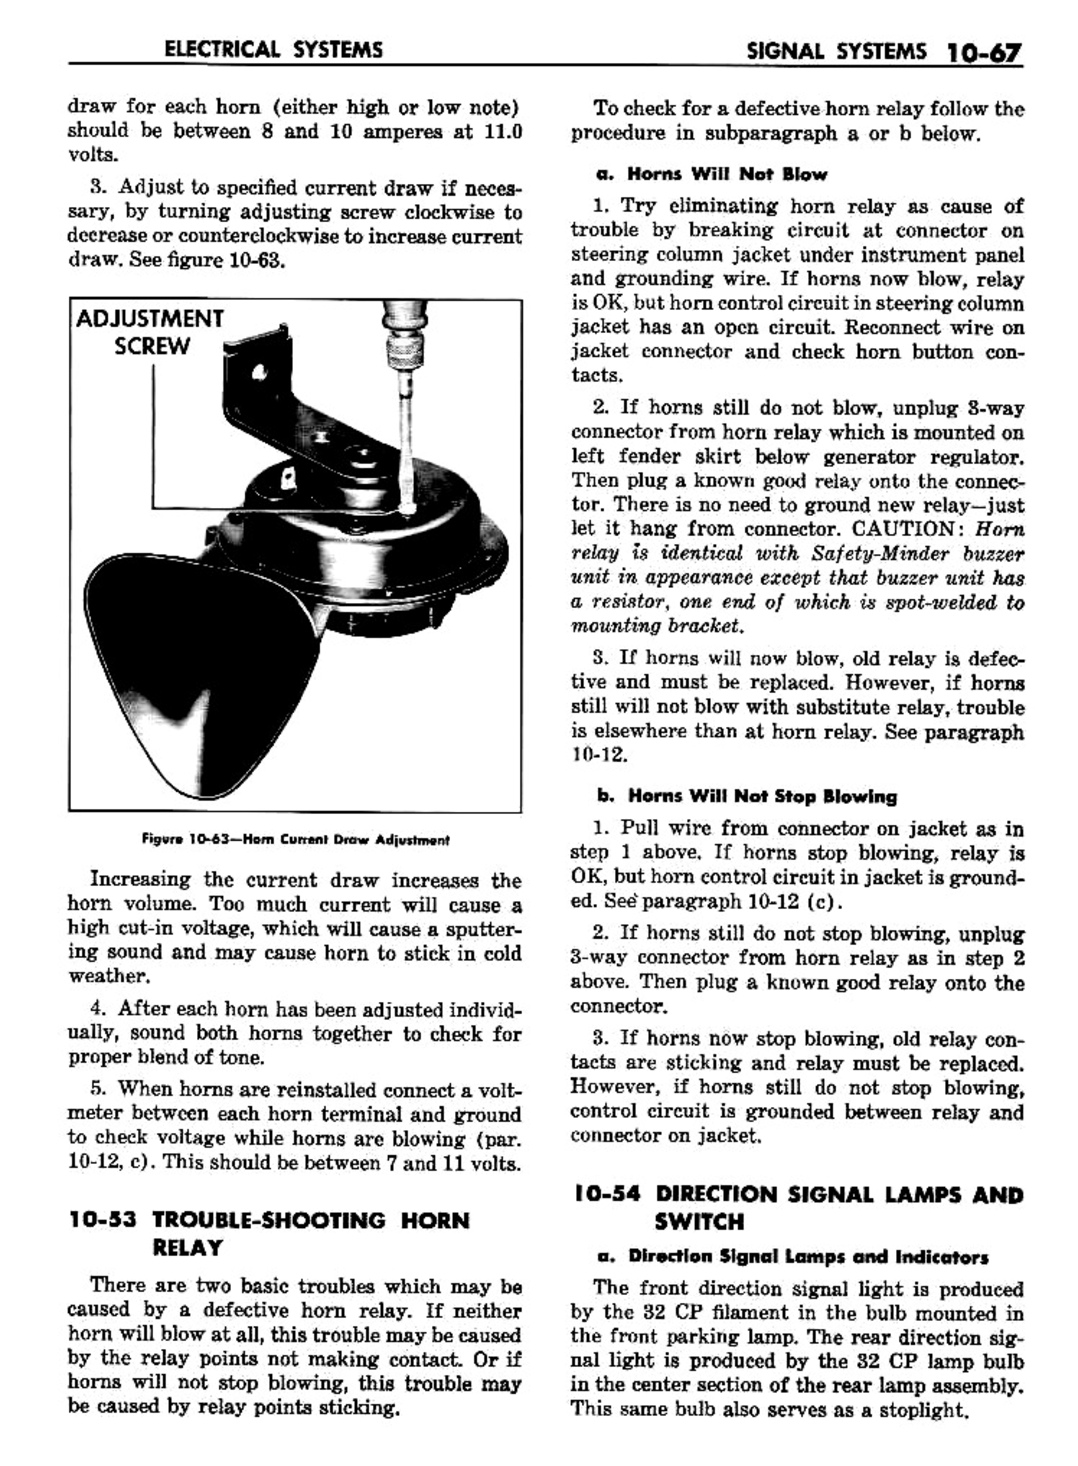 n_11 1957 Buick Shop Manual - Electrical Systems-067-067.jpg